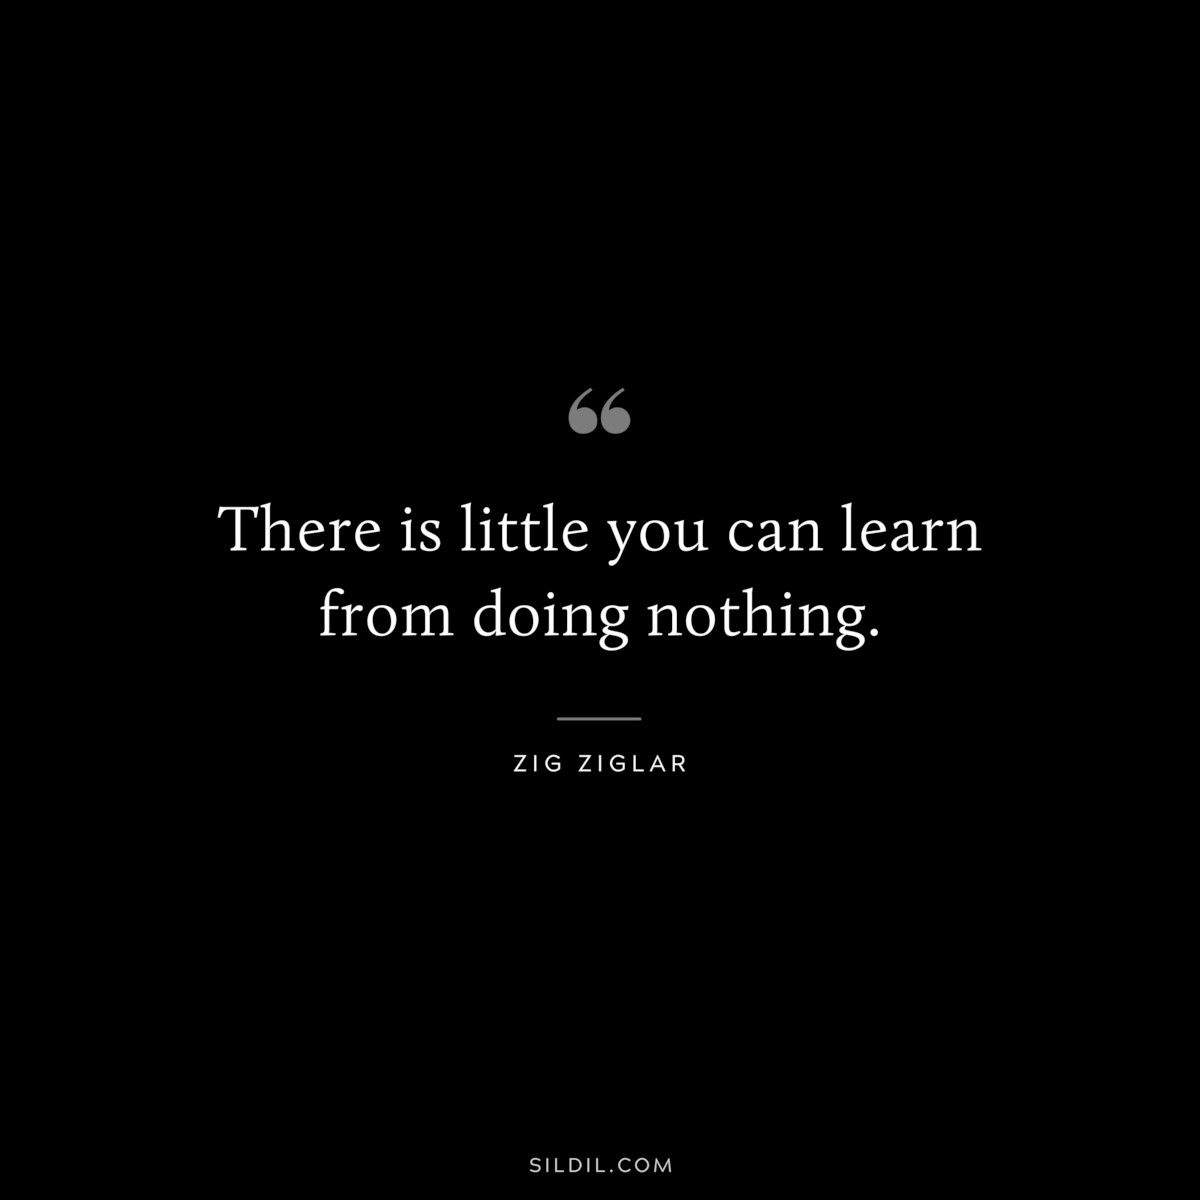 There is little you can learn from doing nothing. ― Zig Ziglar